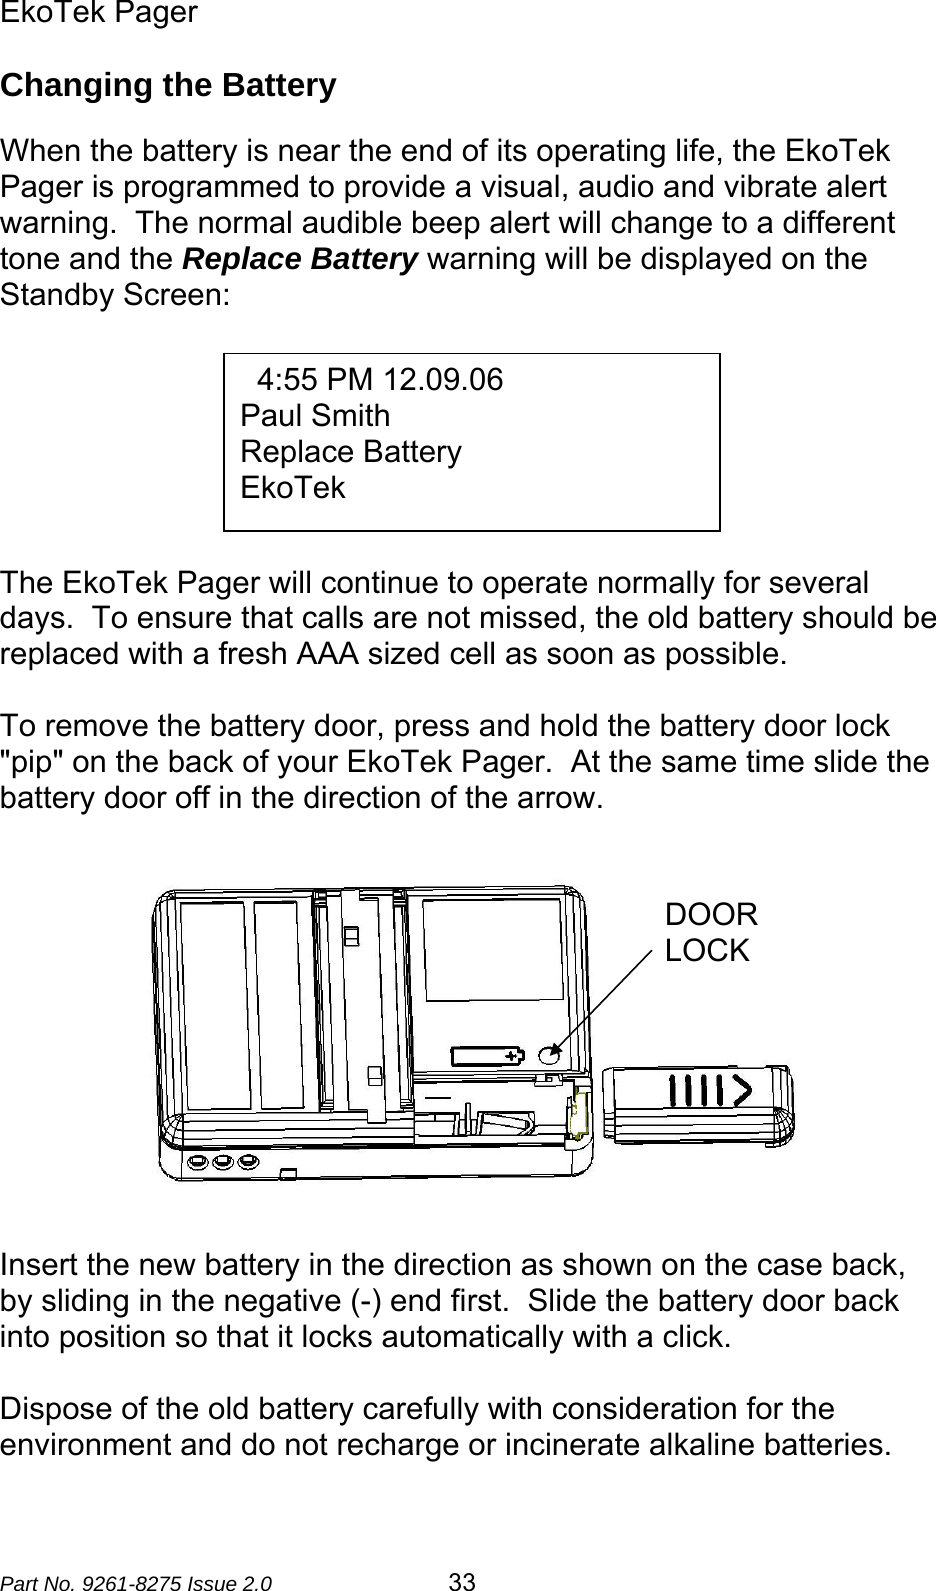 EkoTek Pager  Part No. 9261-8275 Issue 2.0  33 Changing the Battery  When the battery is near the end of its operating life, the EkoTek Pager is programmed to provide a visual, audio and vibrate alert warning.  The normal audible beep alert will change to a different tone and the Replace Battery warning will be displayed on the Standby Screen:        The EkoTek Pager will continue to operate normally for several days.  To ensure that calls are not missed, the old battery should be replaced with a fresh AAA sized cell as soon as possible.  To remove the battery door, press and hold the battery door lock &quot;pip&quot; on the back of your EkoTek Pager.  At the same time slide the battery door off in the direction of the arrow.               Insert the new battery in the direction as shown on the case back, by sliding in the negative (-) end first.  Slide the battery door back into position so that it locks automatically with a click.  Dispose of the old battery carefully with consideration for the environment and do not recharge or incinerate alkaline batteries.     4:55 PM 12.09.06 Paul Smith Replace Battery EkoTek DOOR LOCK 